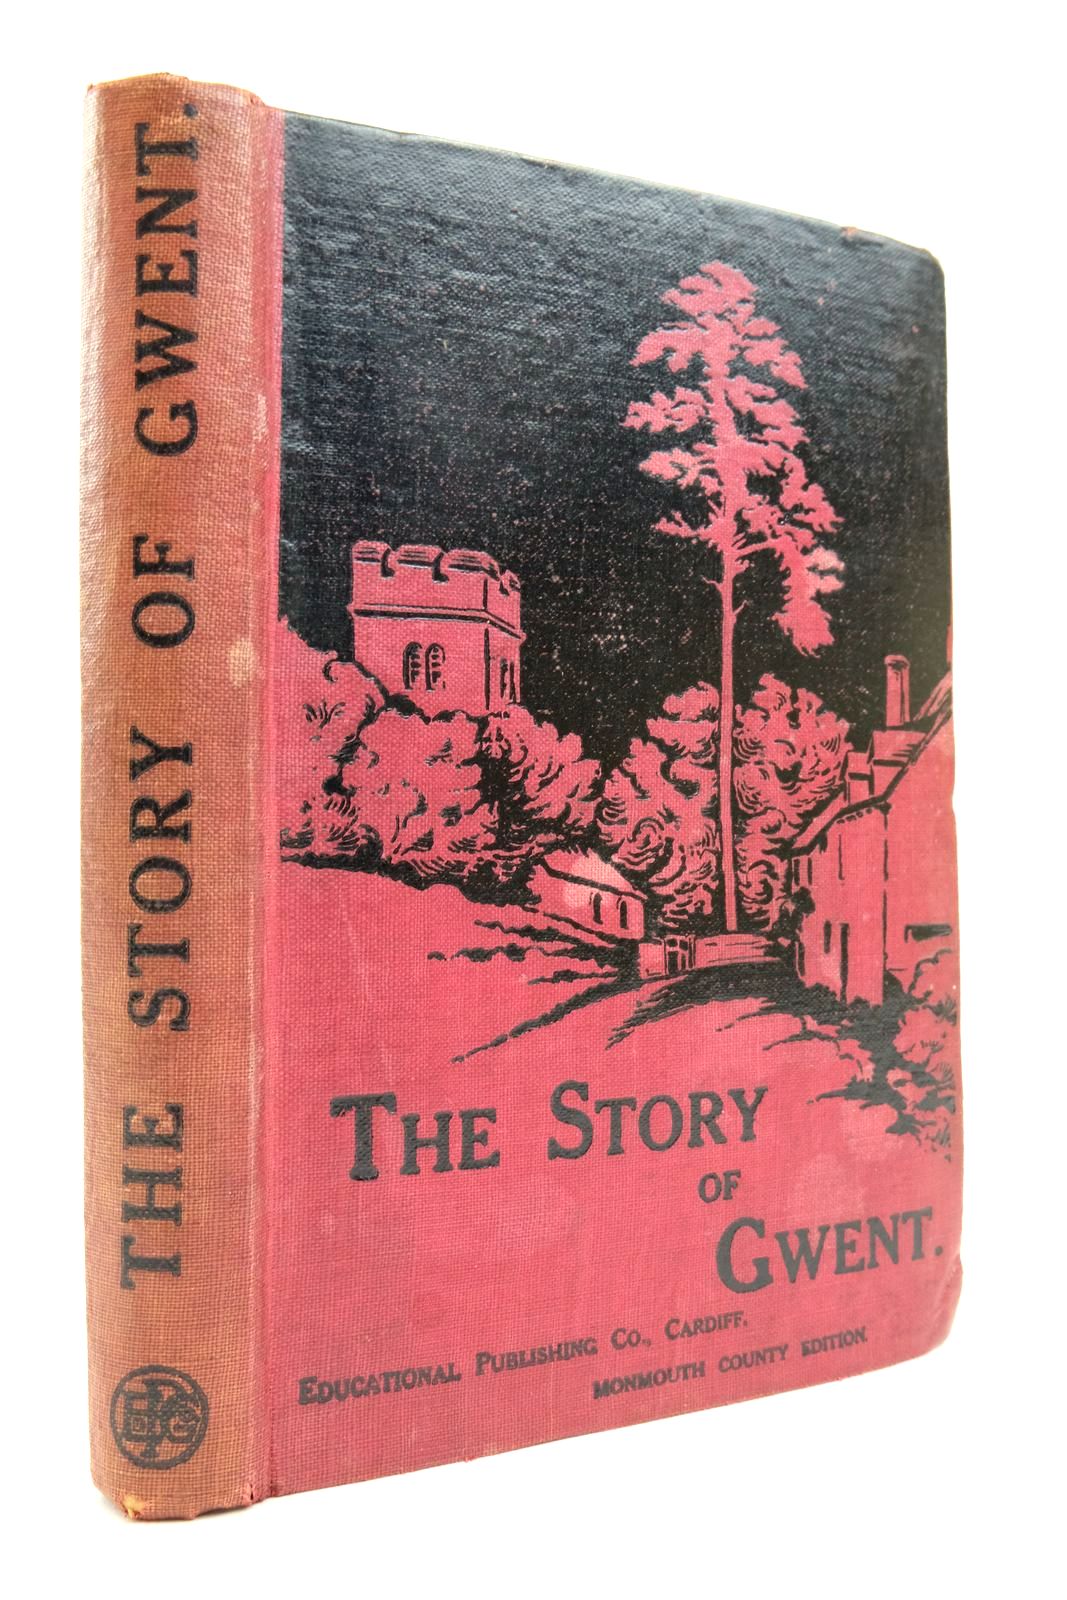 Photo of THE STORY OF GWENT- Stock Number: 2137892